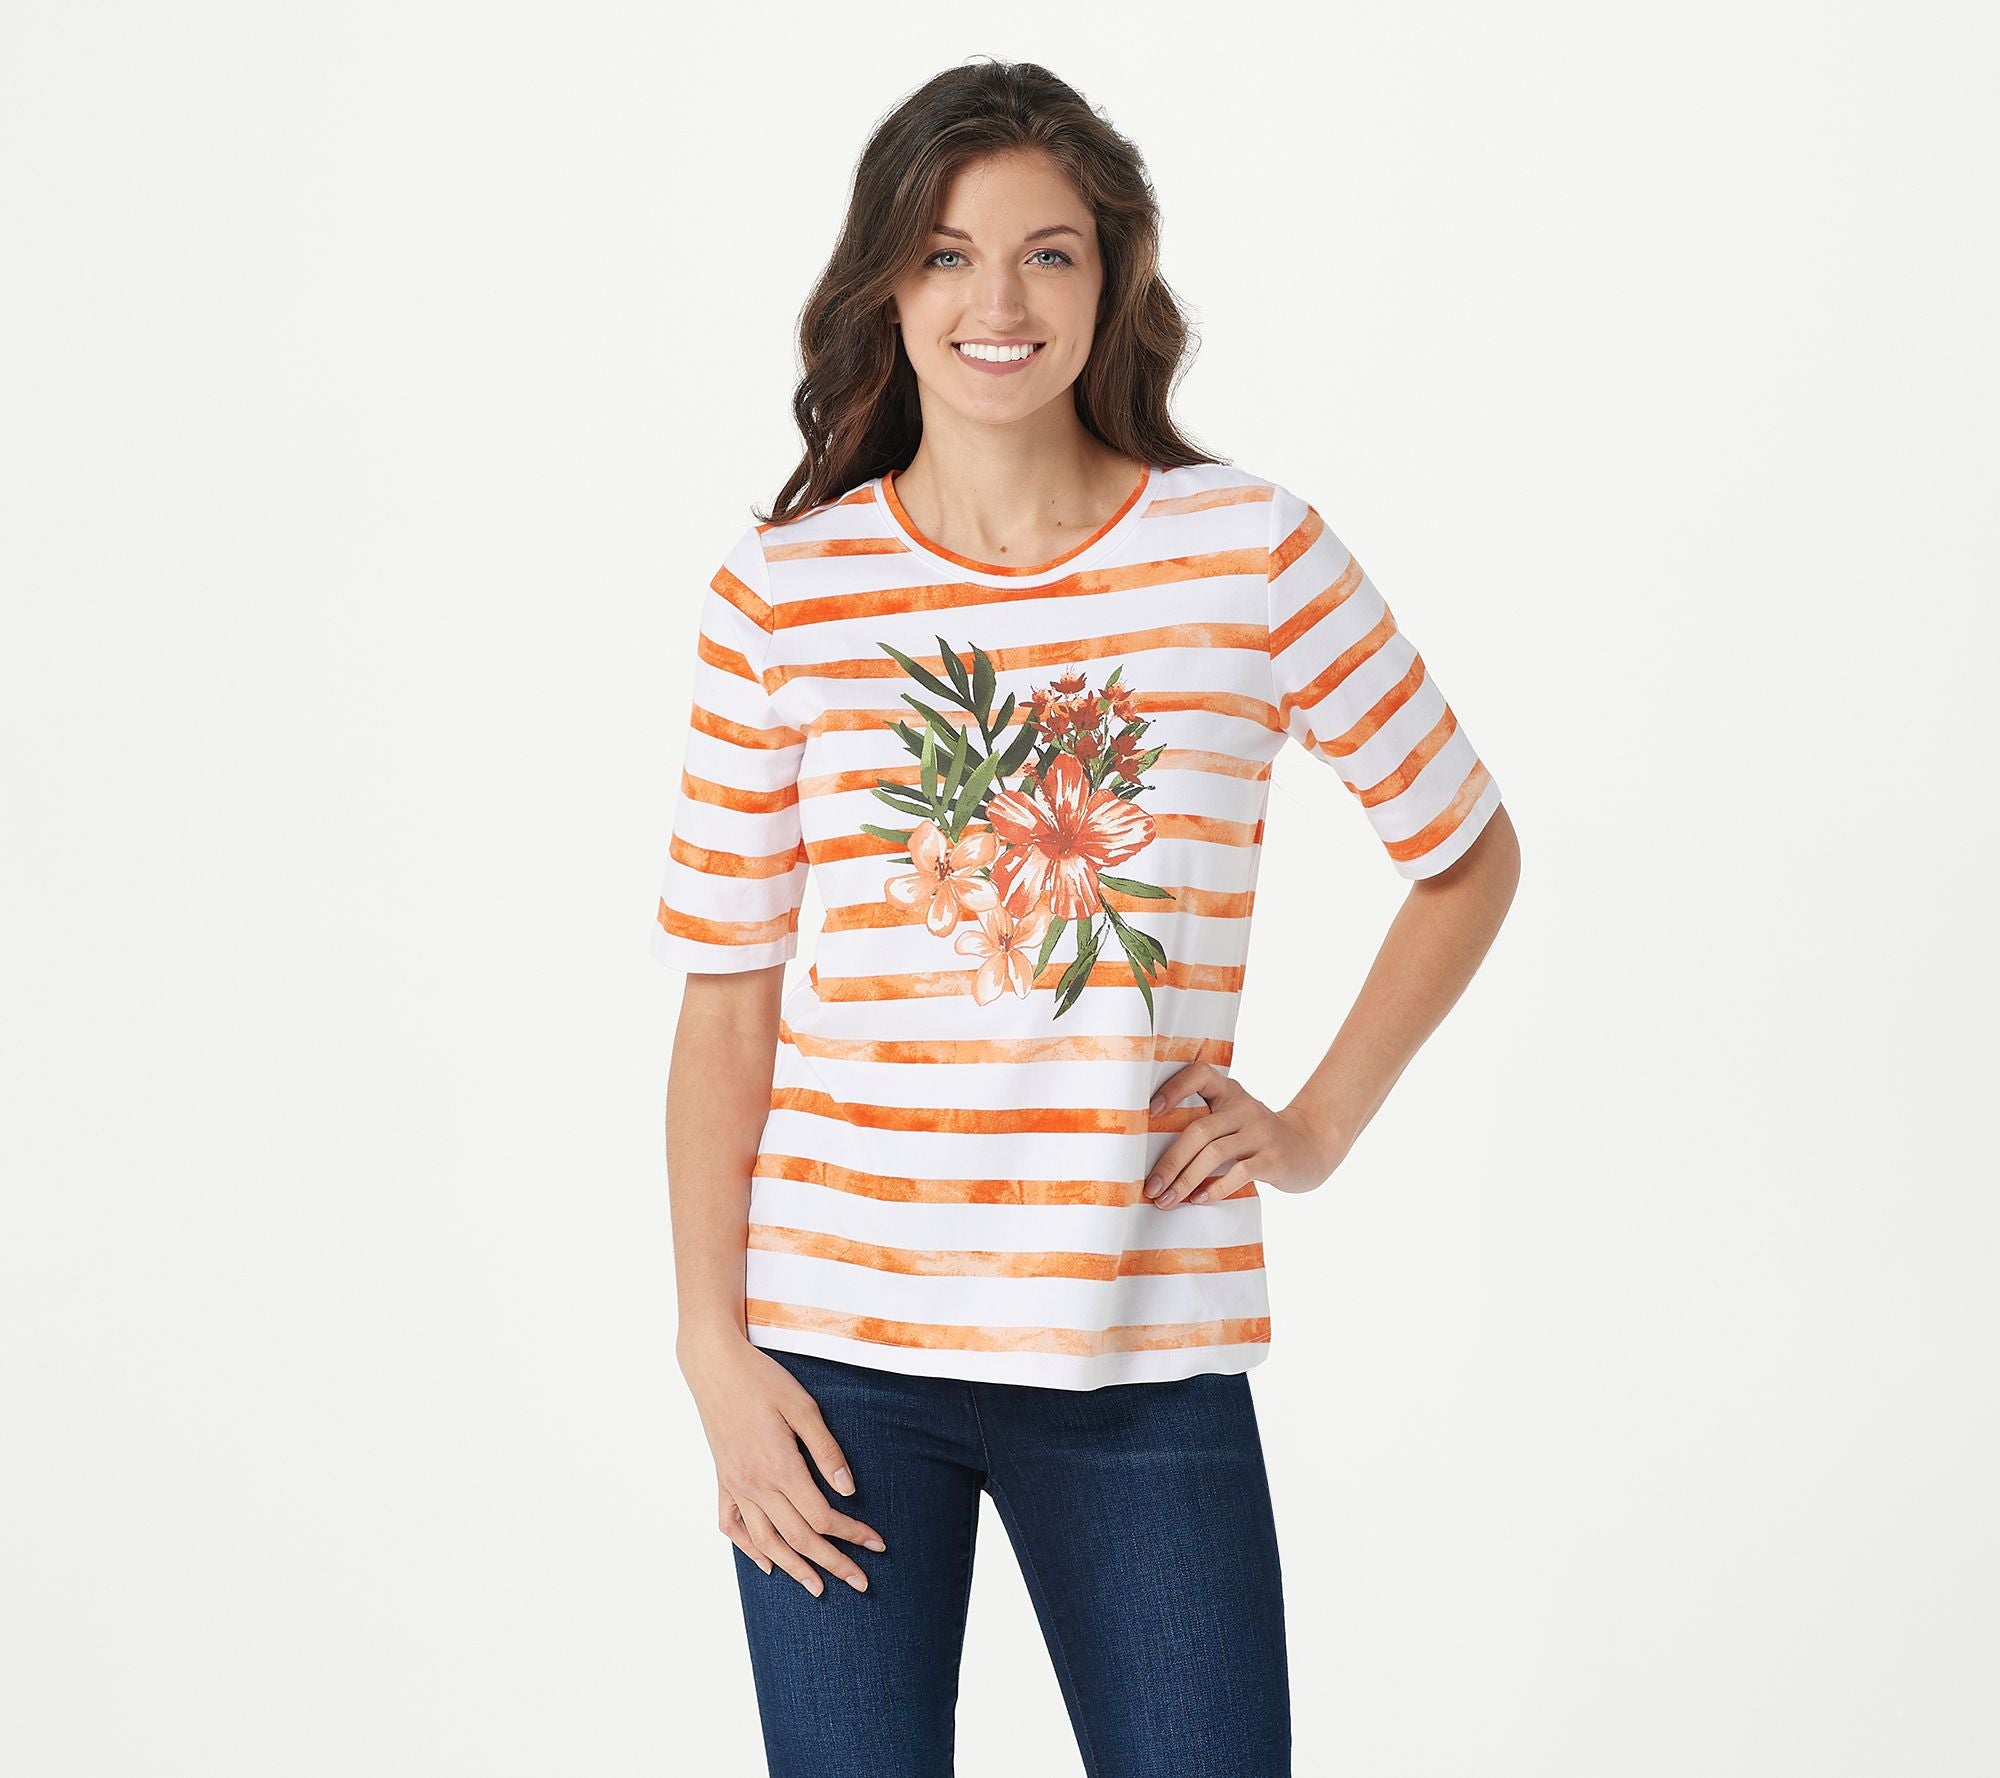 Denim & Co. Printed Perfect Jersey Elbow Sleeve Top